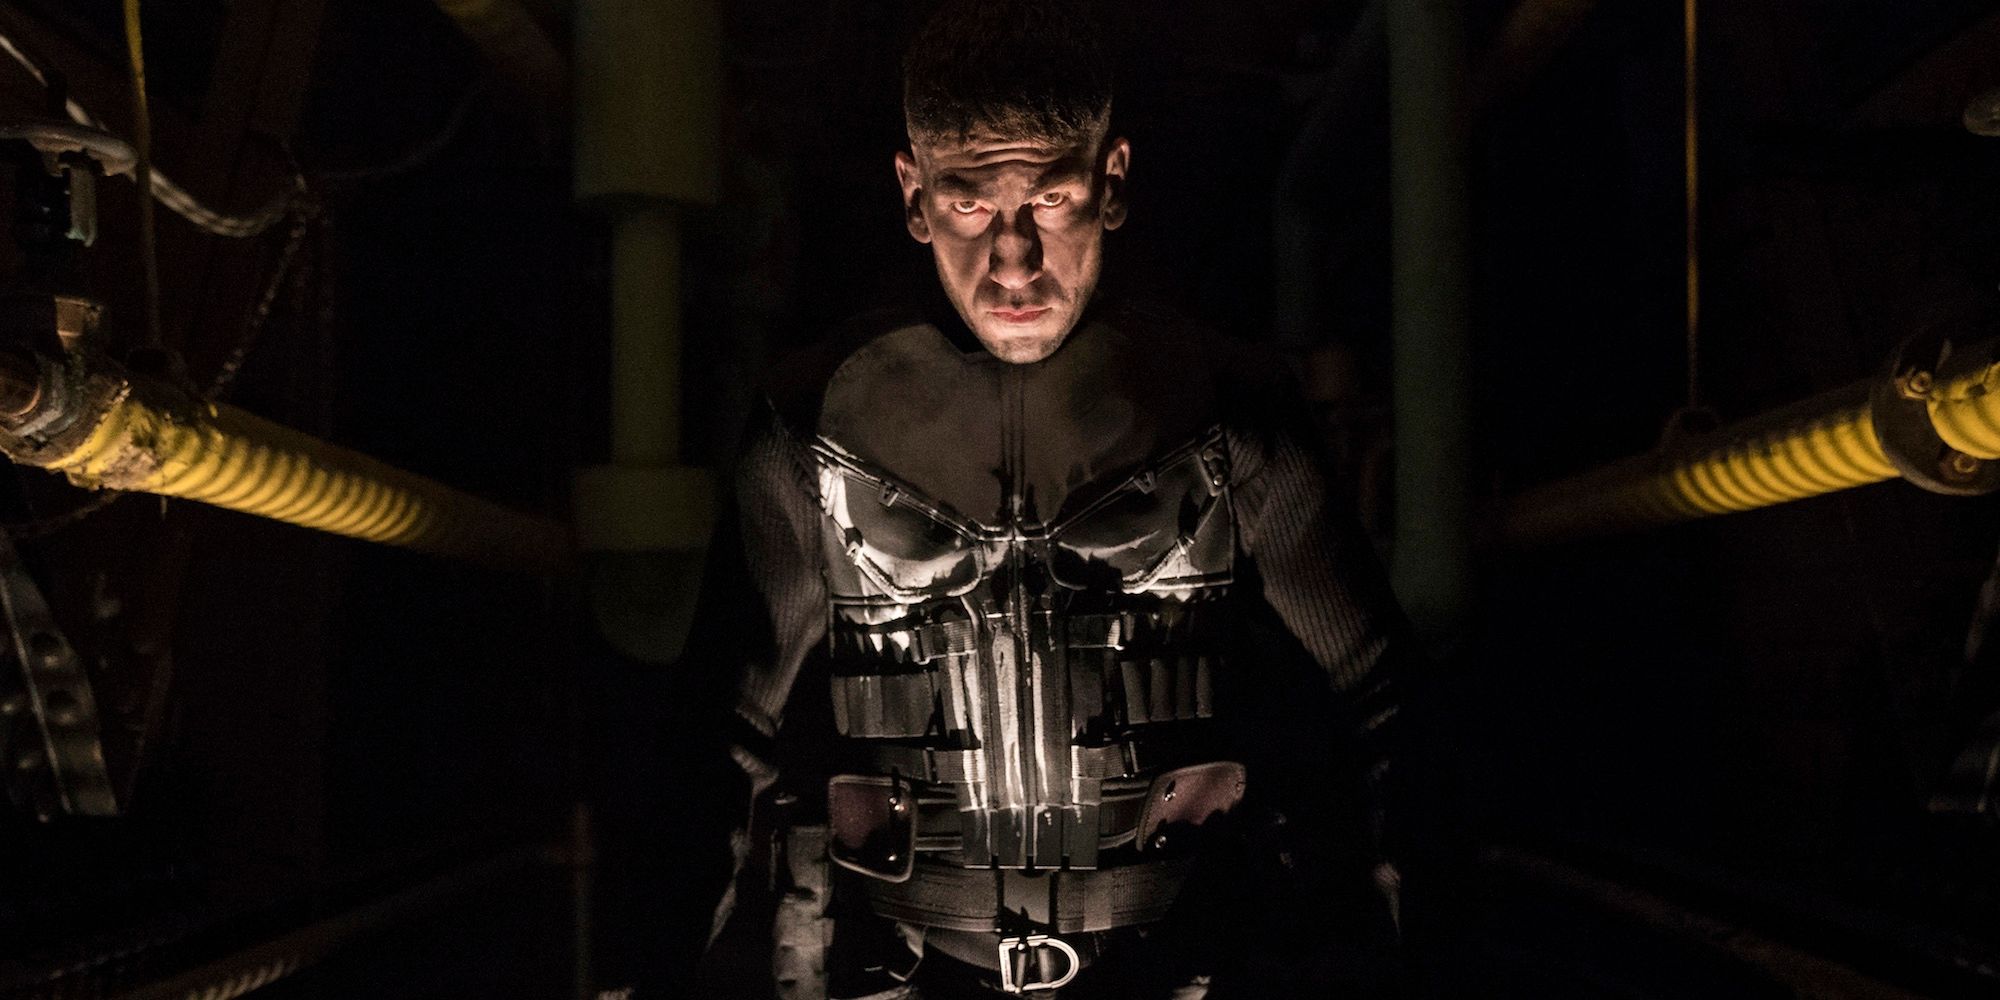 The Punisher looks at the camera in The Punisher.